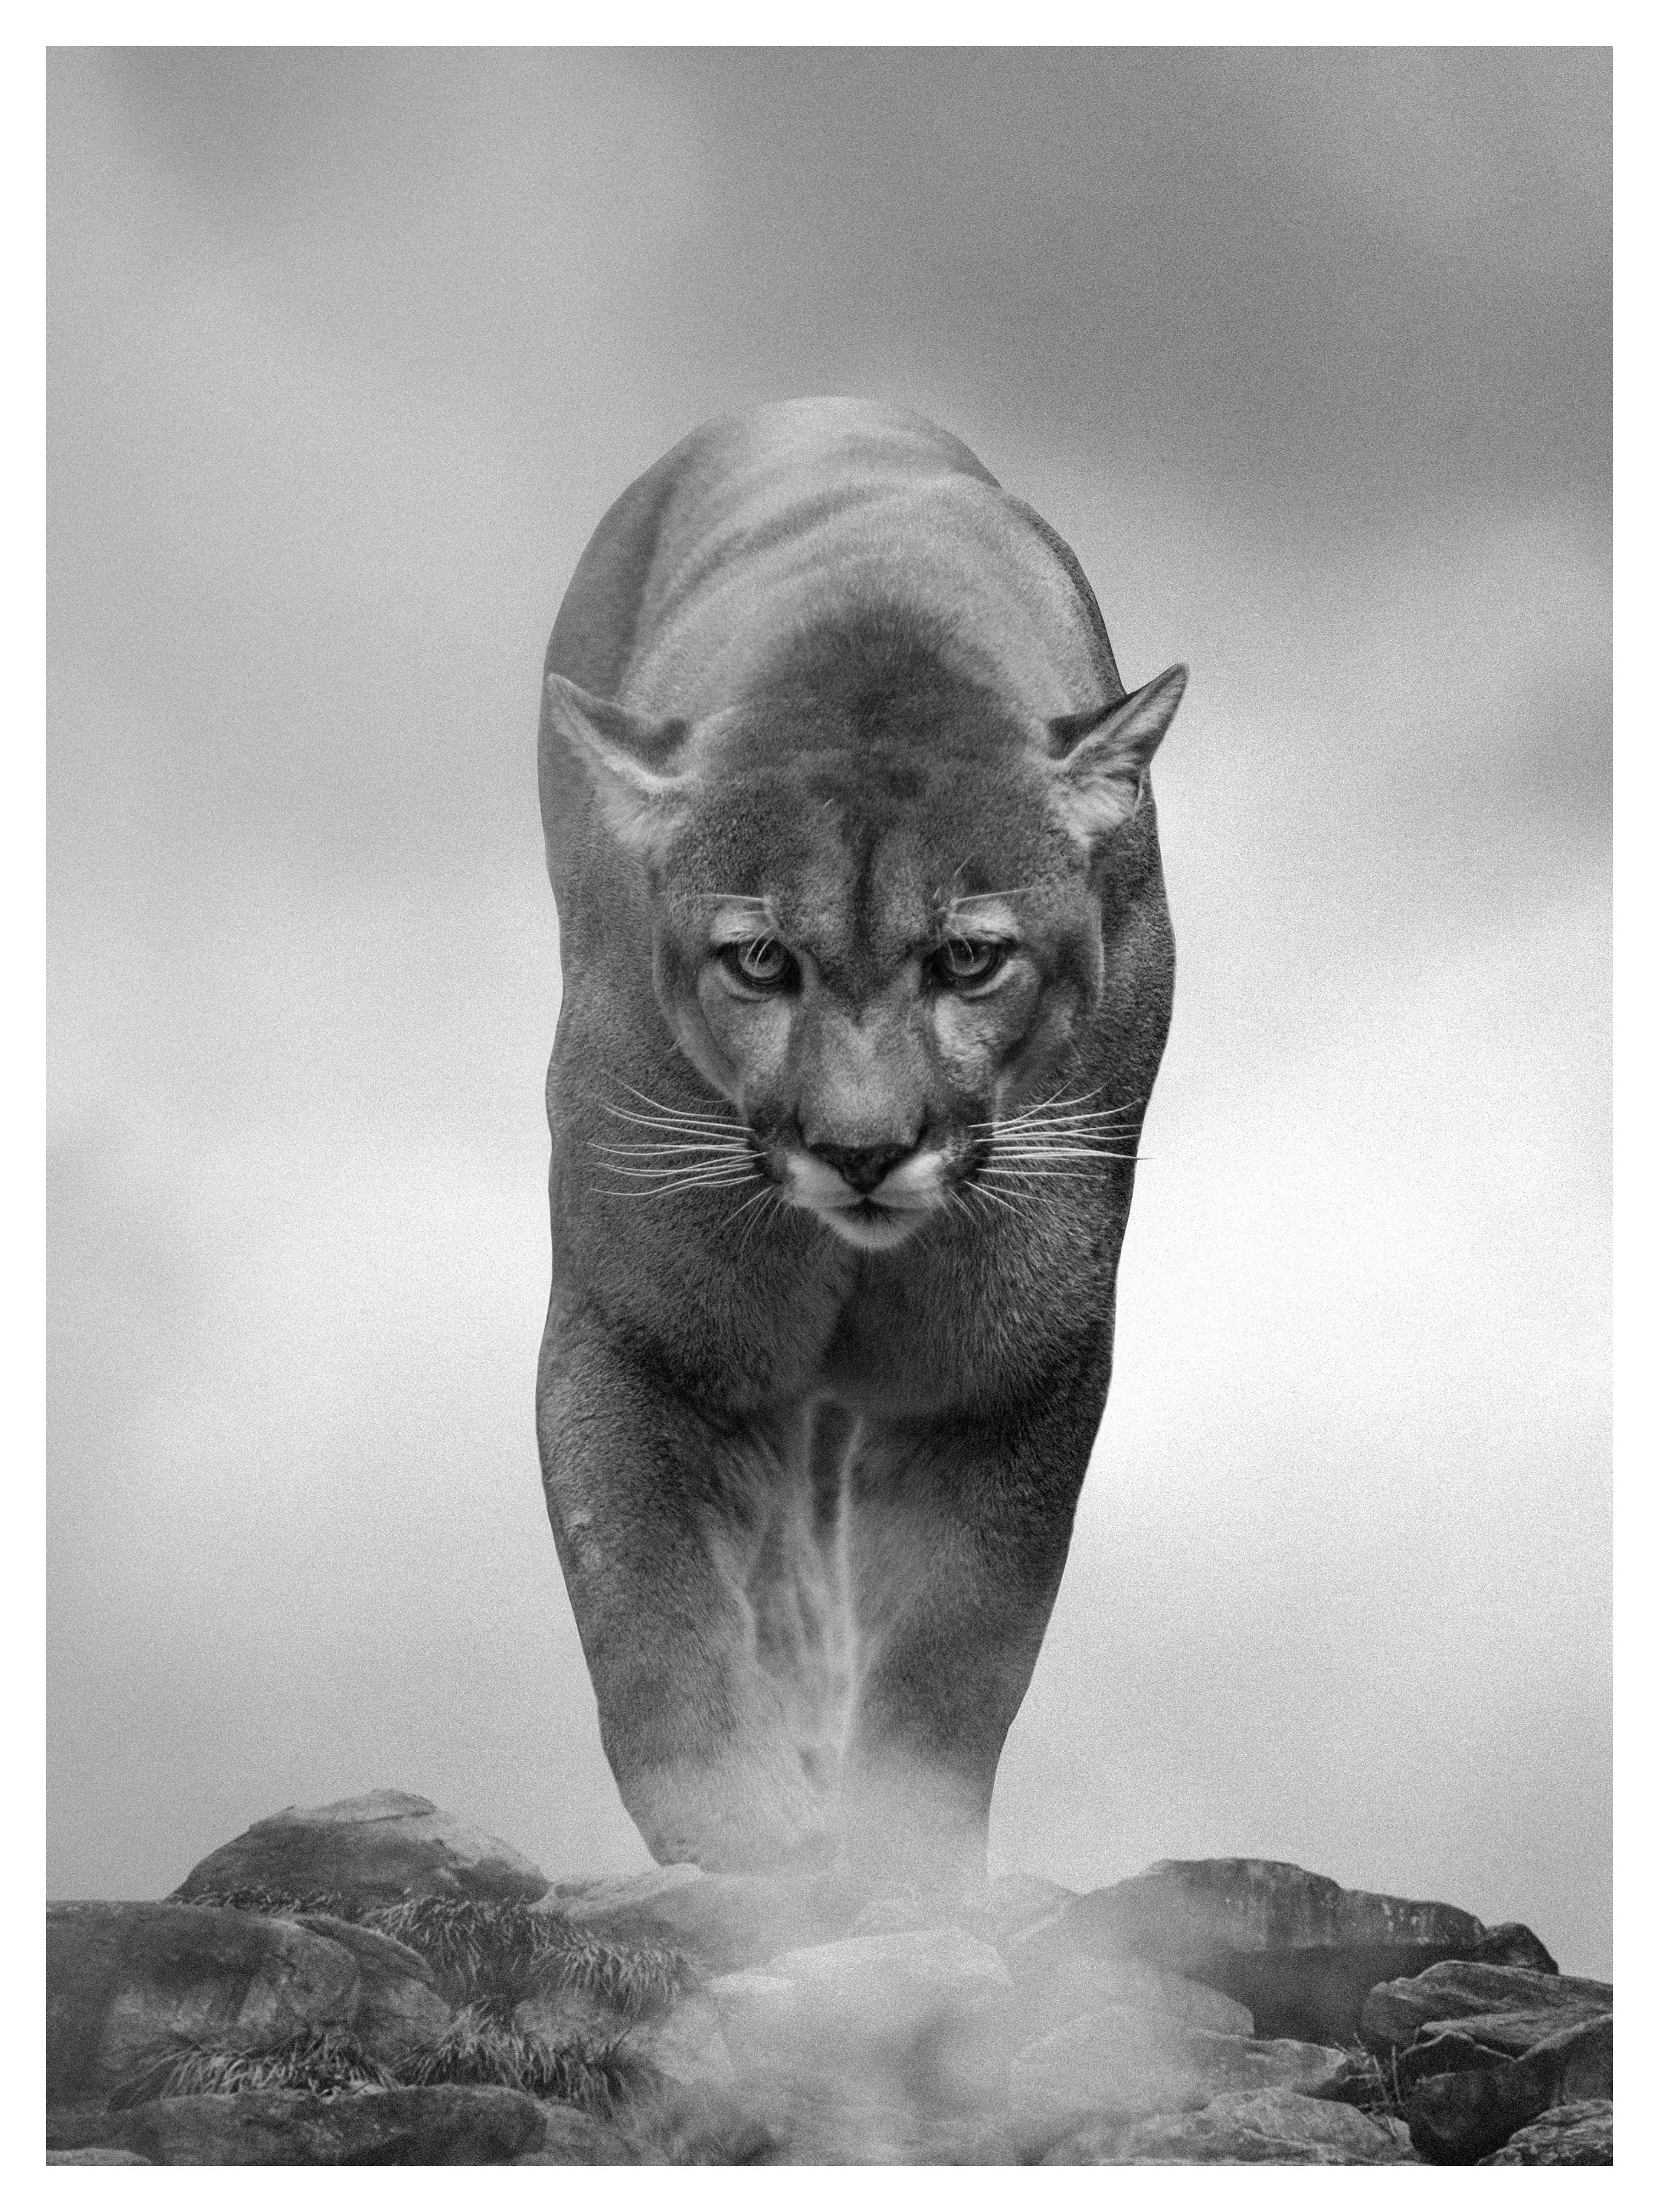 Shane Russeck Landscape Photograph - King of the Mountain - 20x30 Black and White Photography, Cougar, Mountain Lion